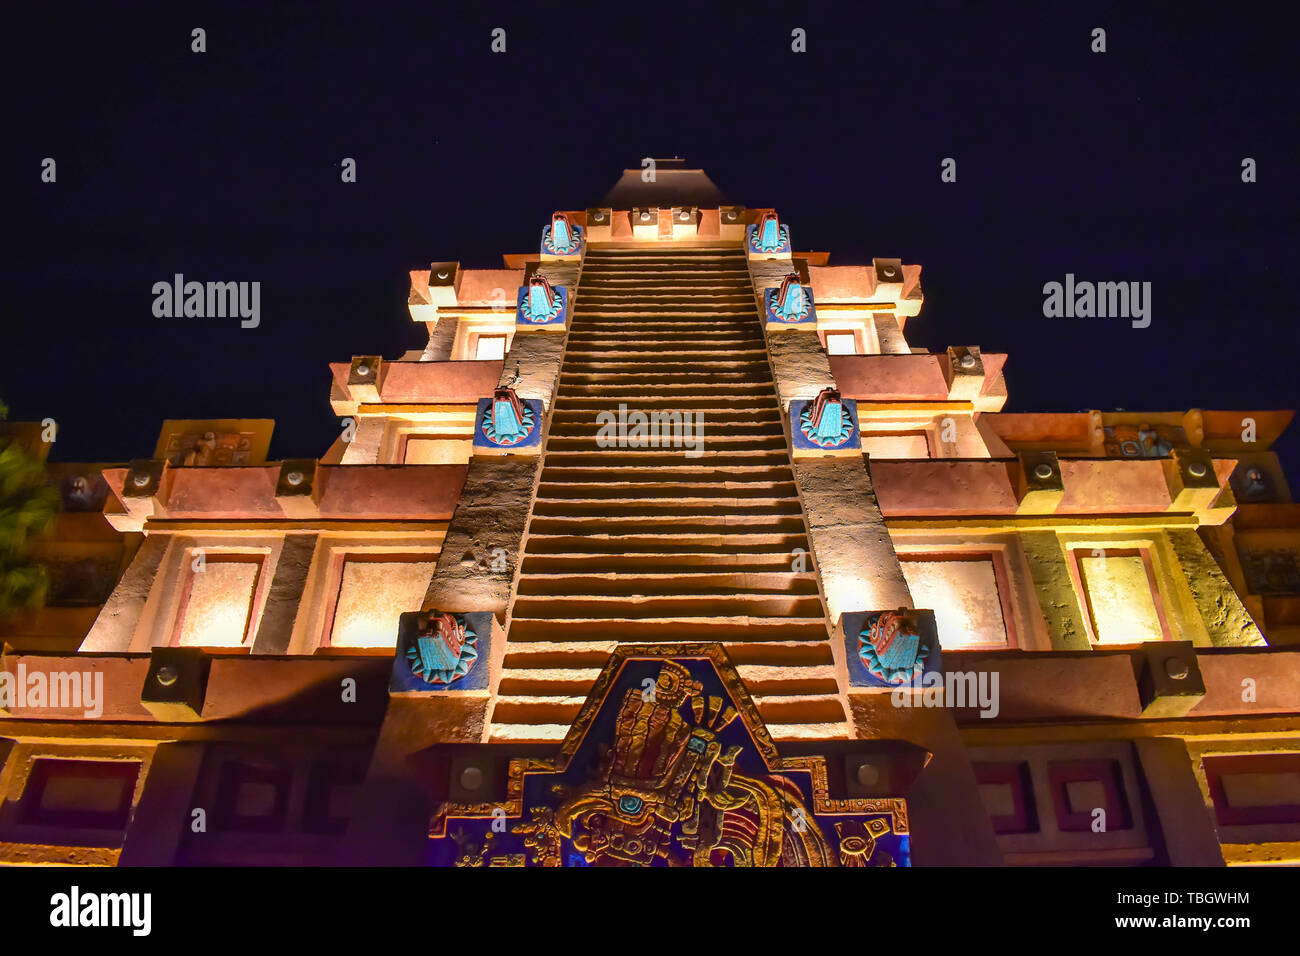 Orlando, Florida . March 27, 2019. Top view of Maya Pyramid in Mexico Pavilion on night background at Epcot in Walt Disney World . Stock Photo